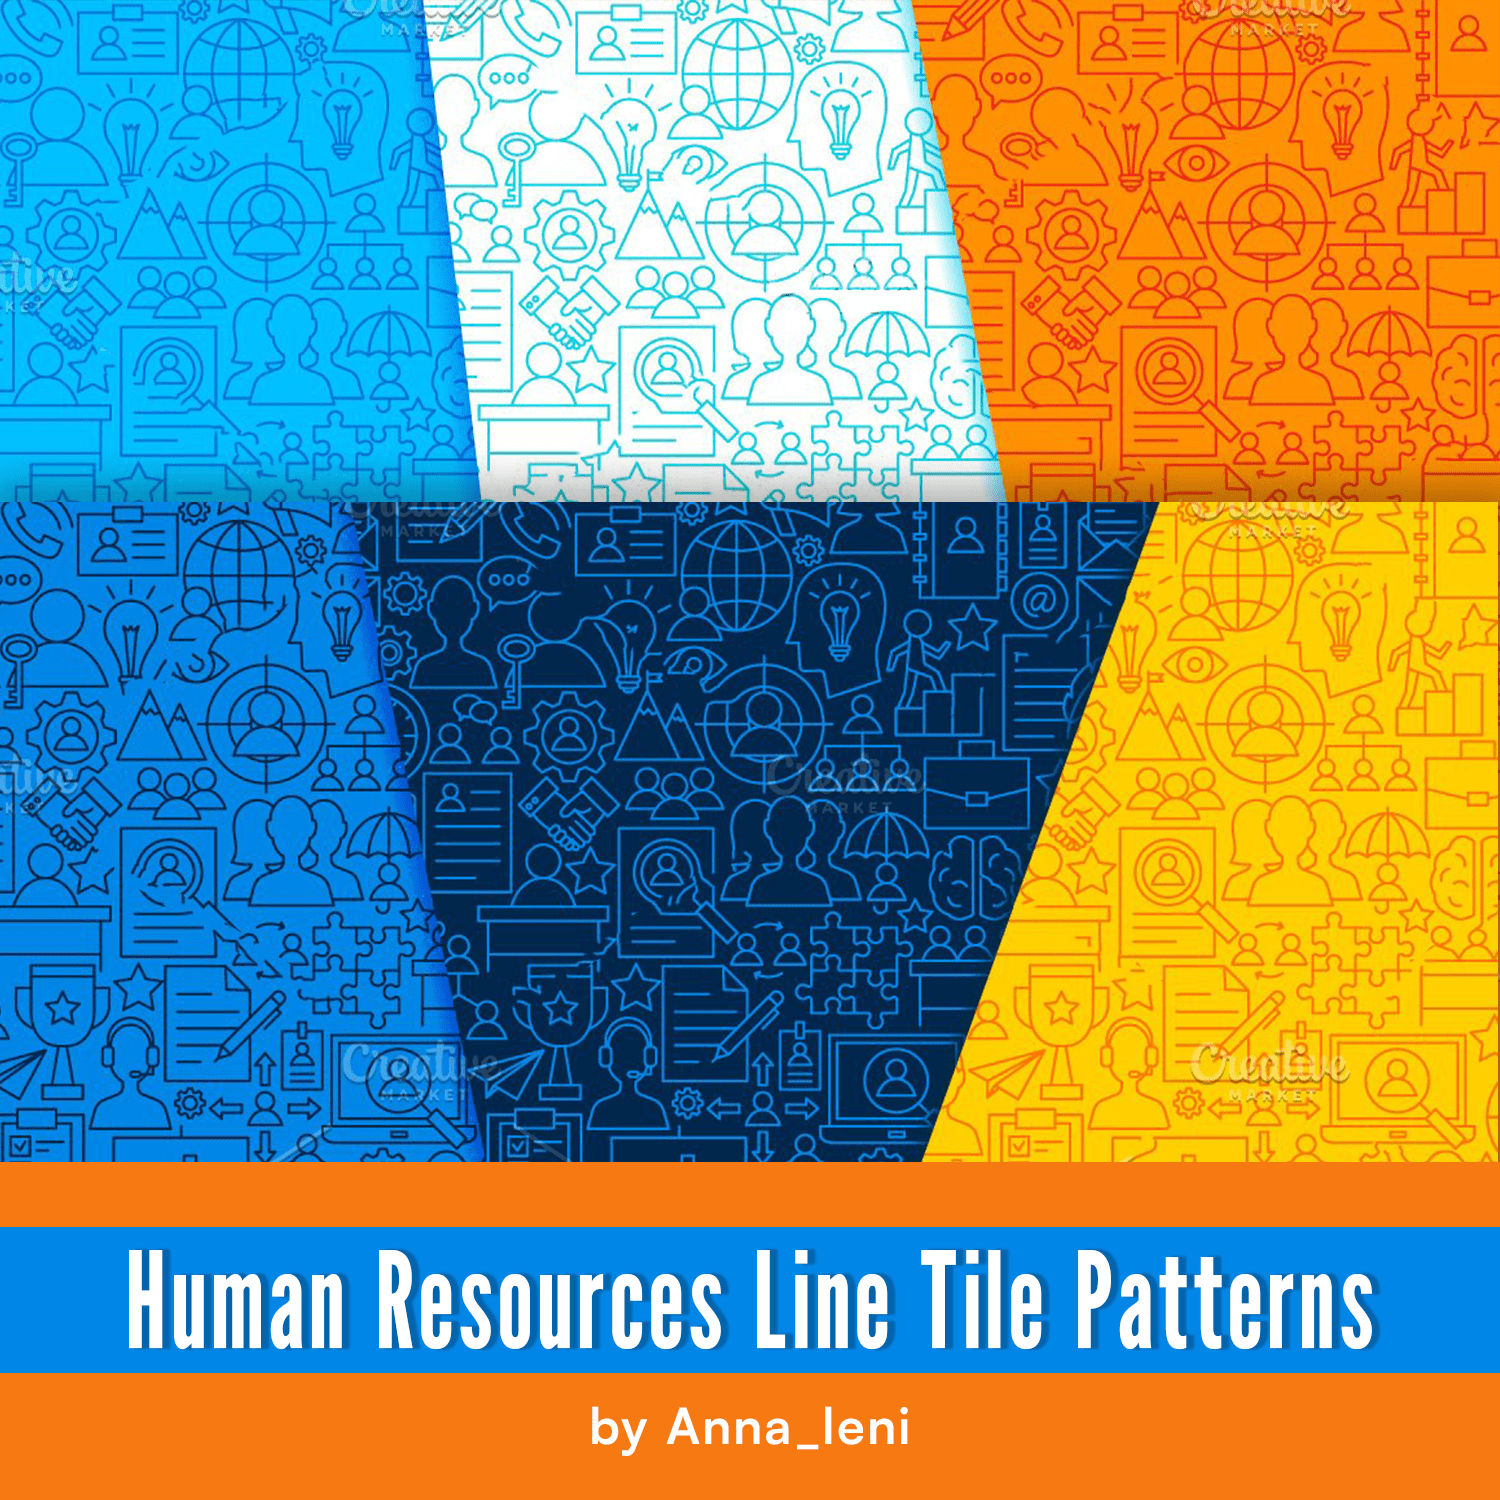 Human Resources Line Tile Patterns cover.